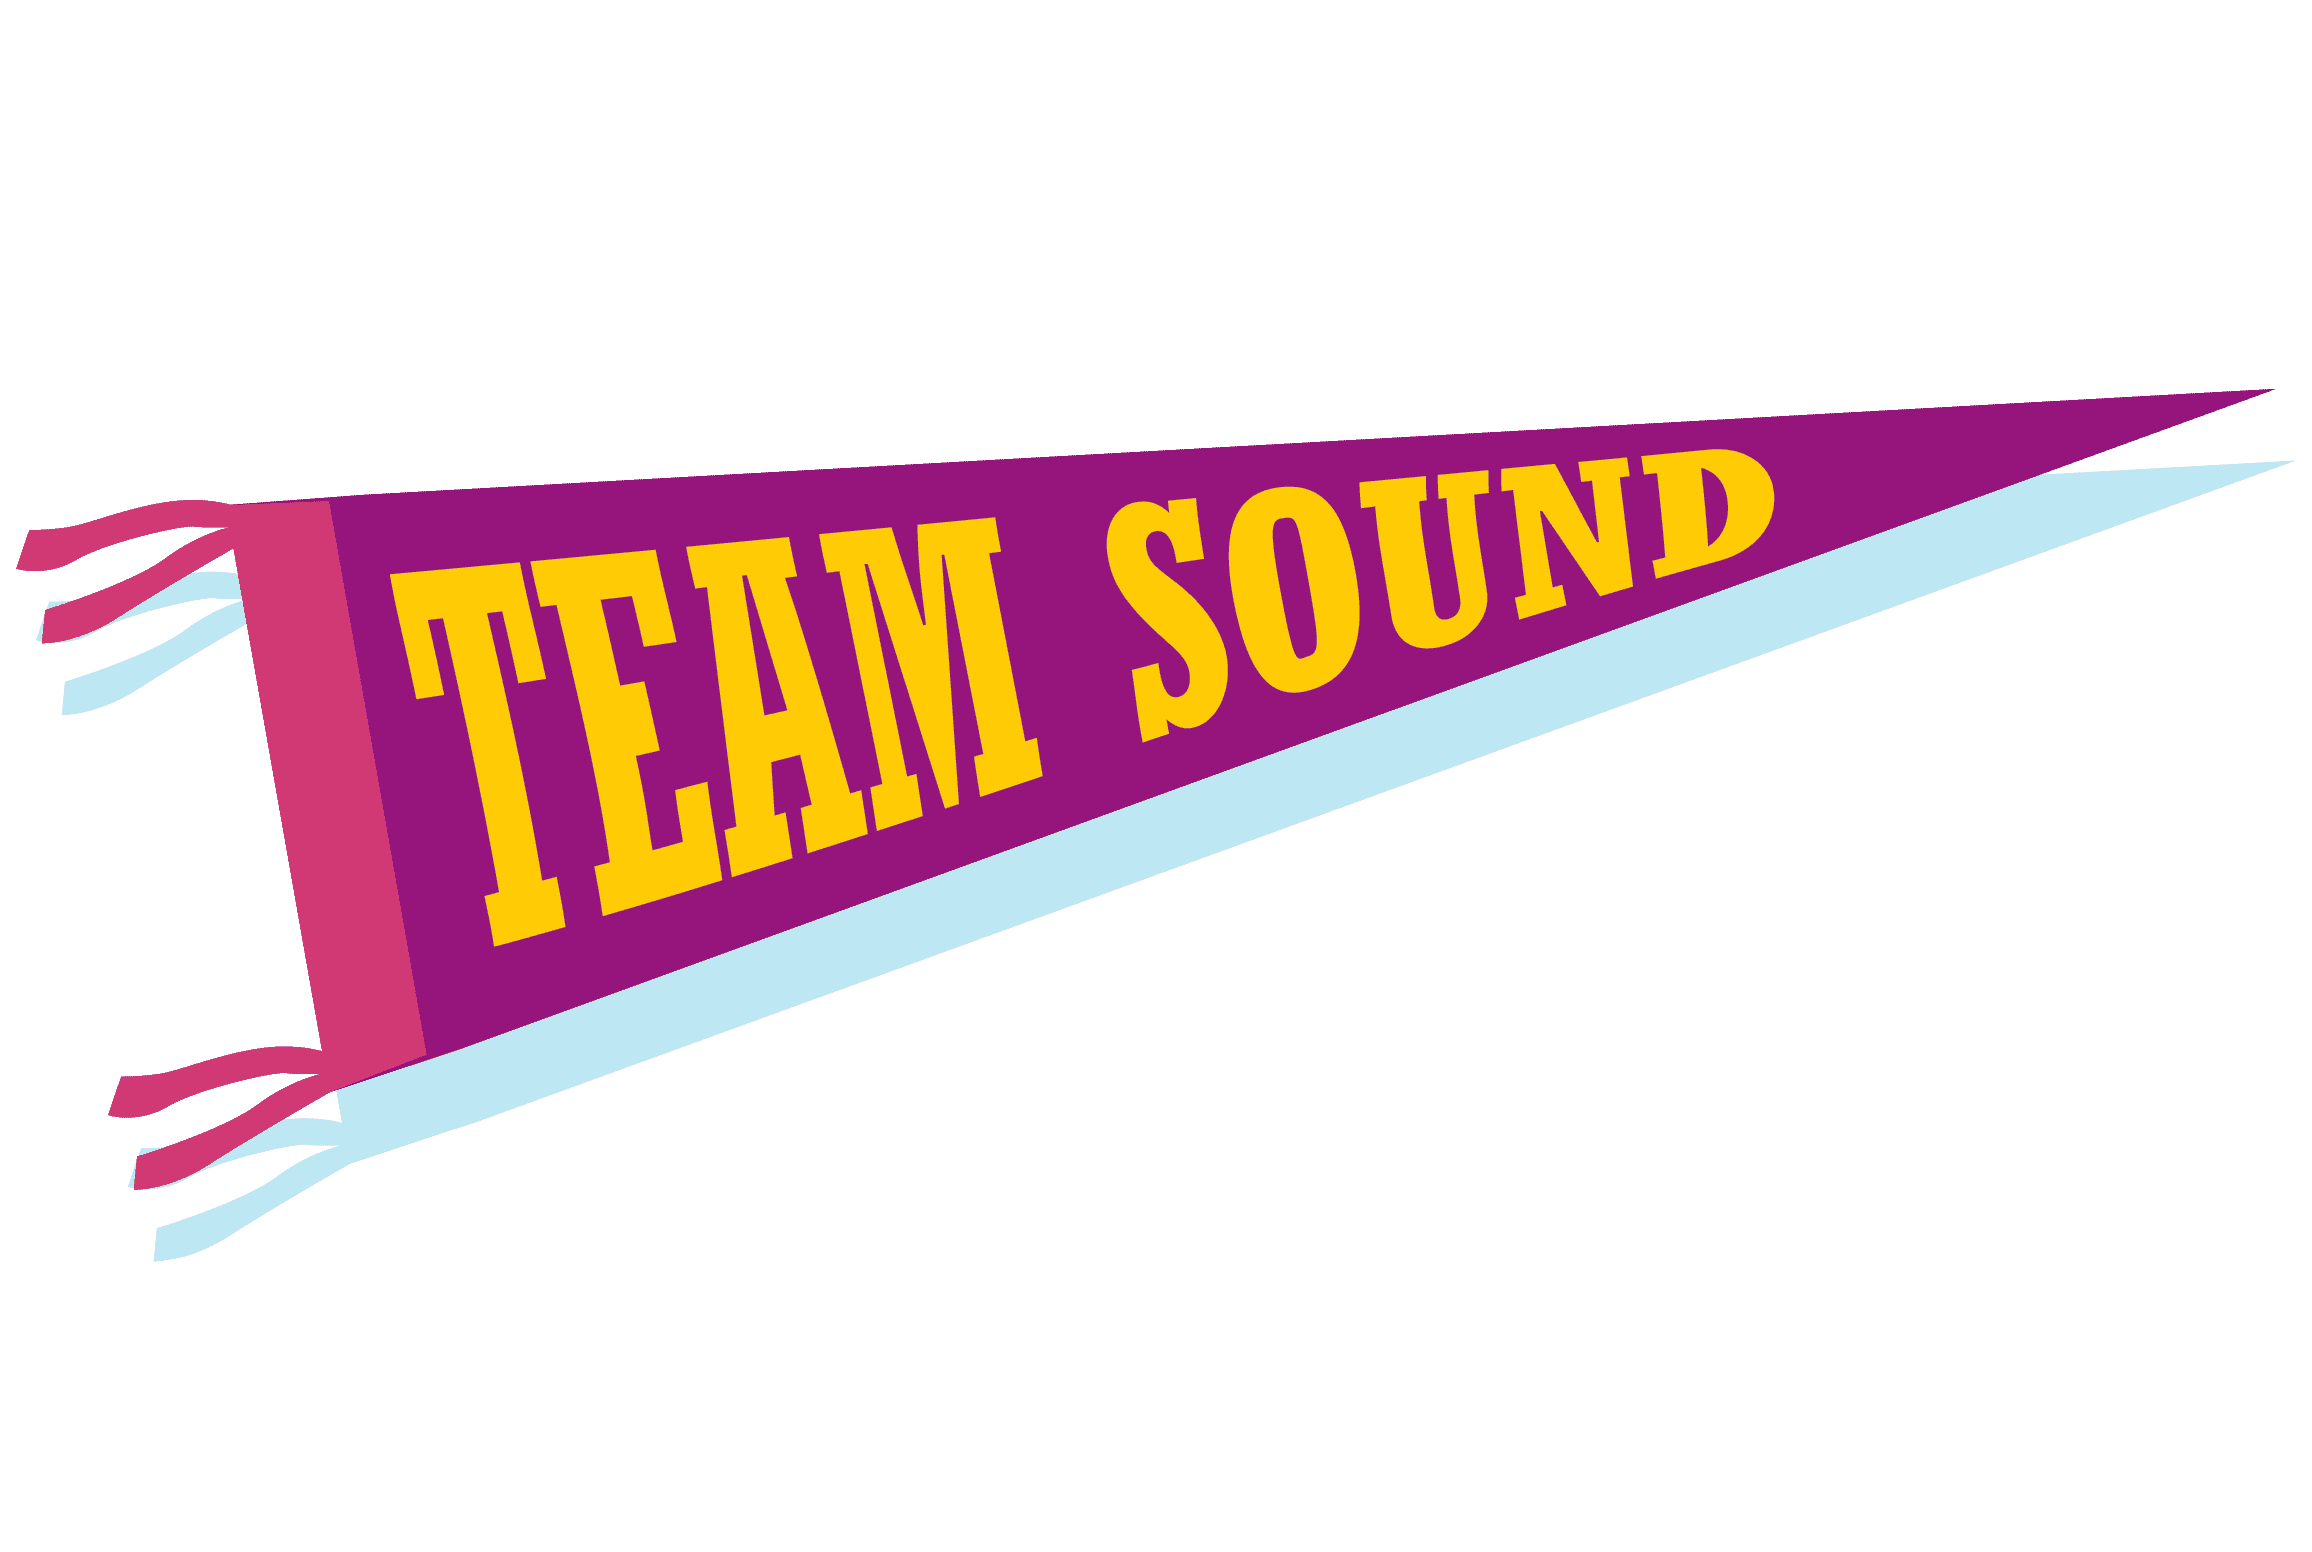 Image of a sports banner that reads “Team Sound.